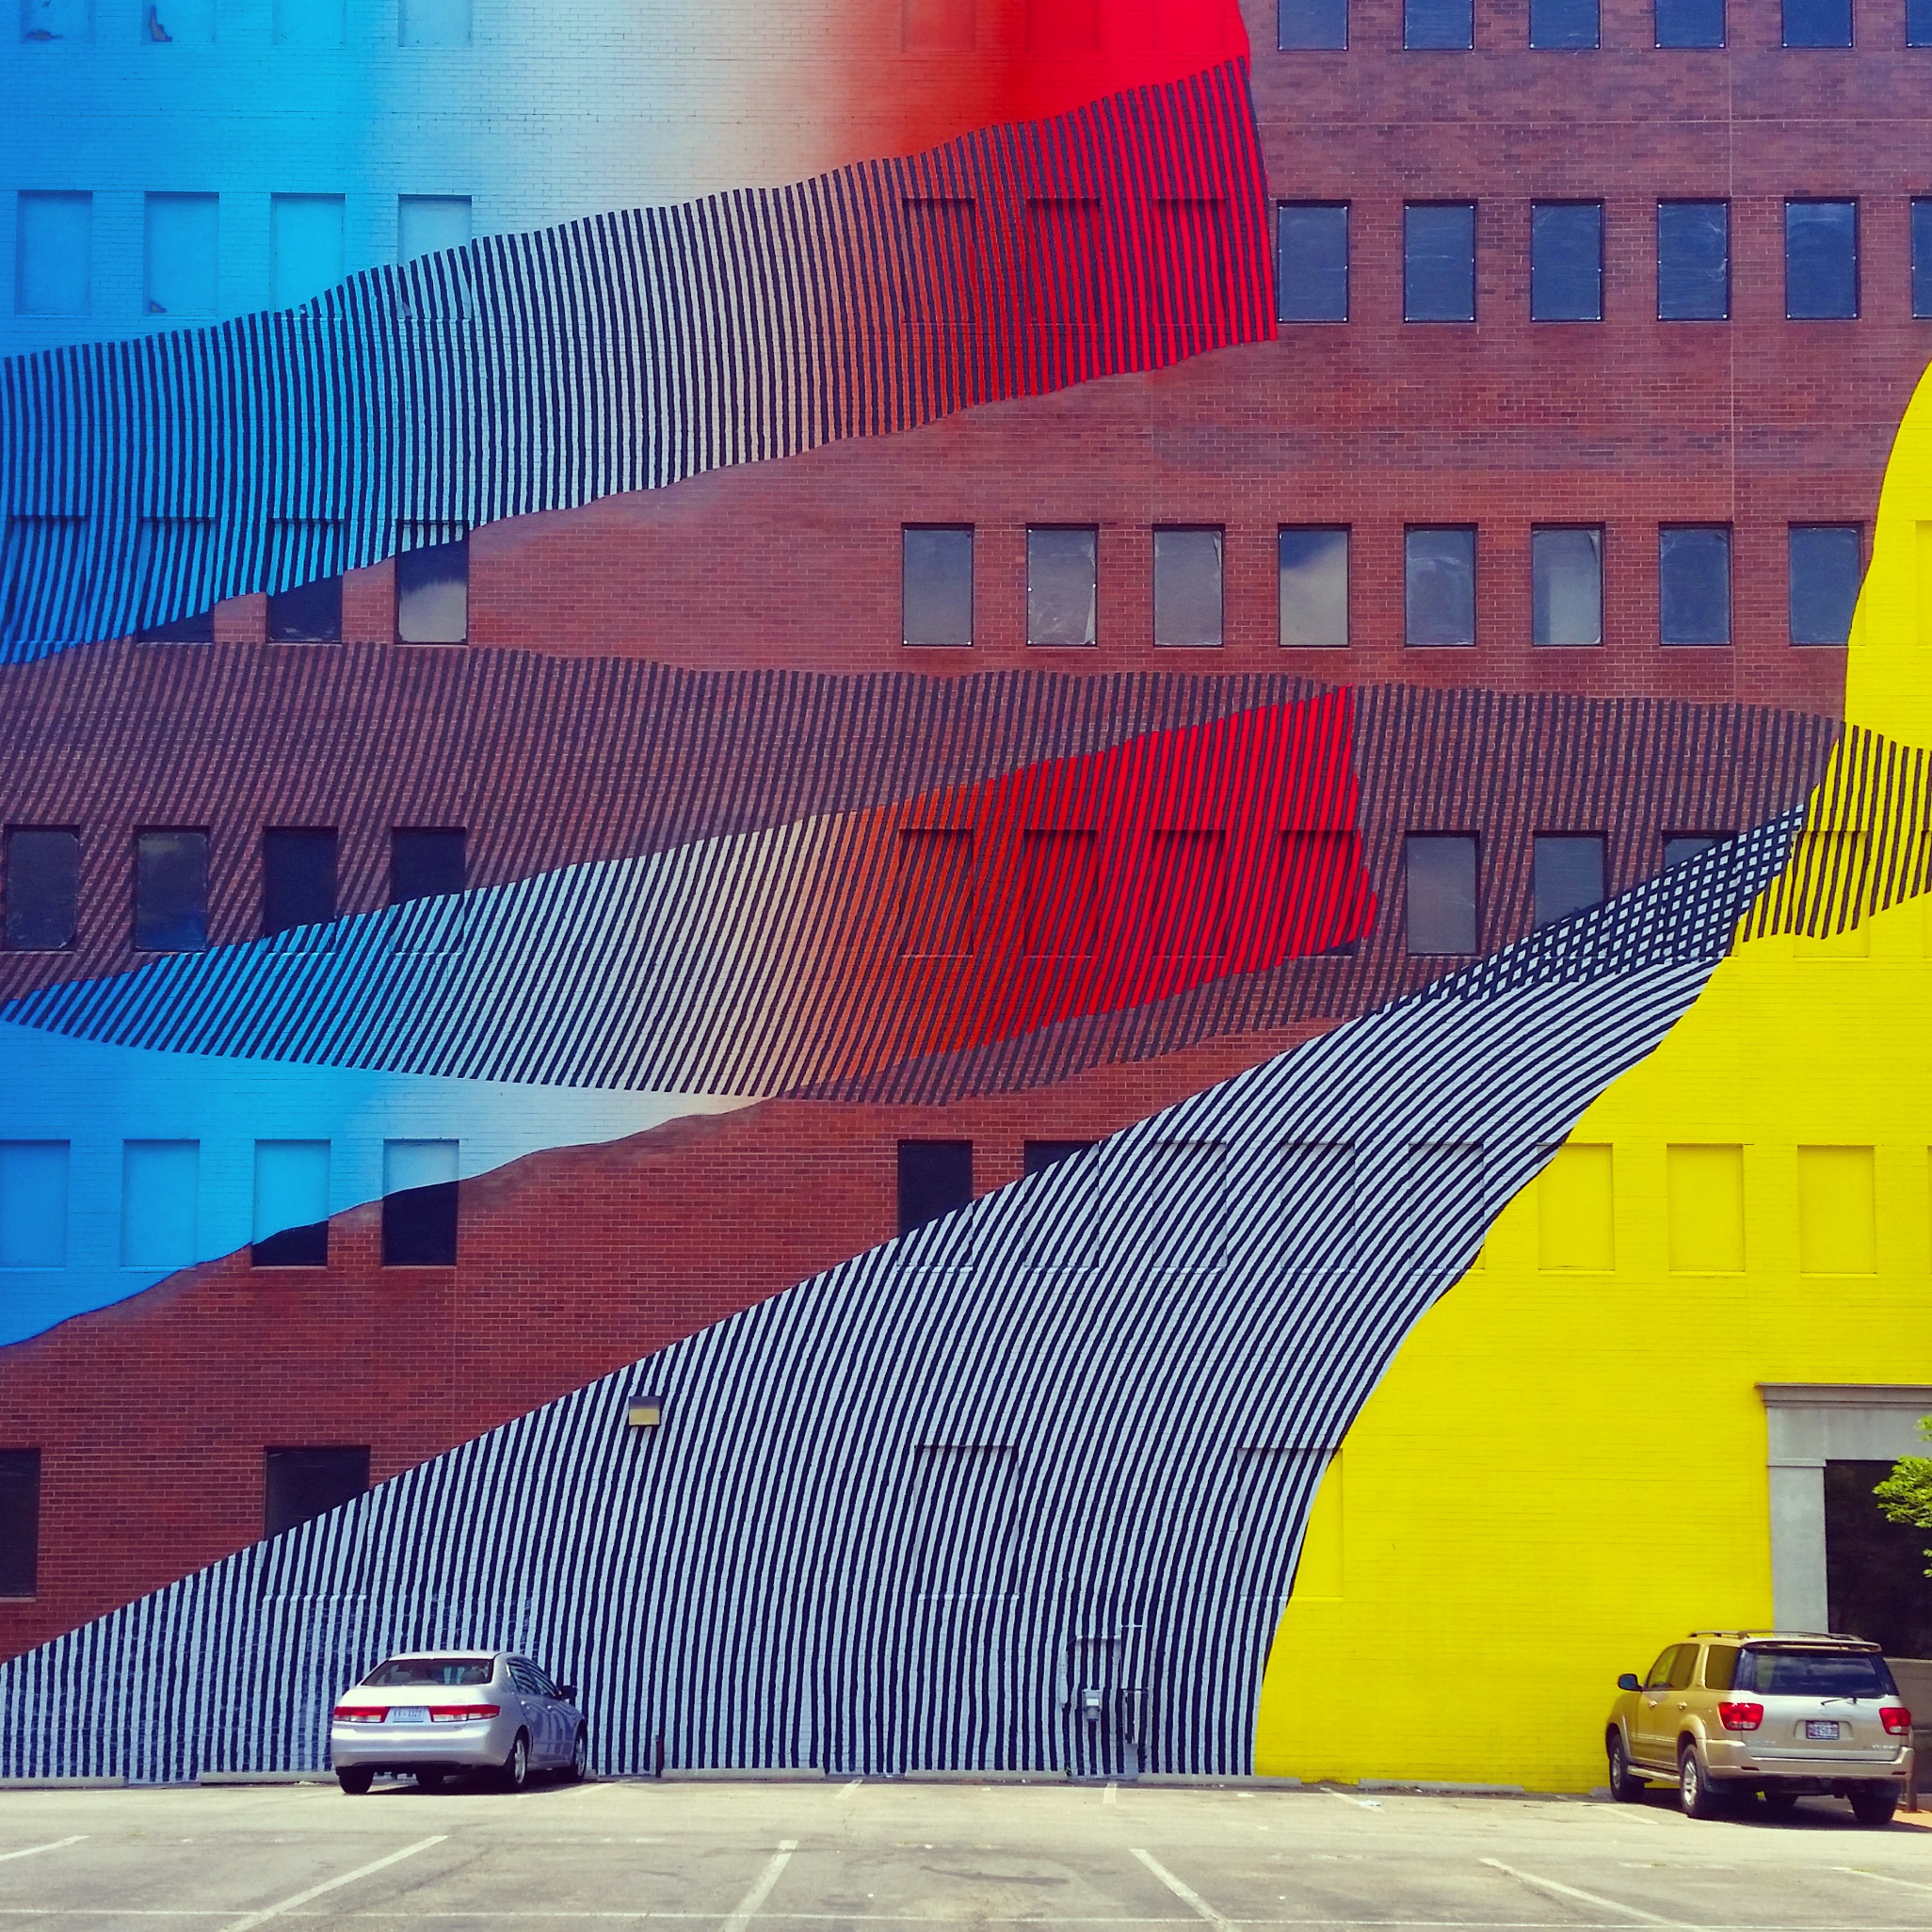 The street art in NoMA brightens up any winter day!